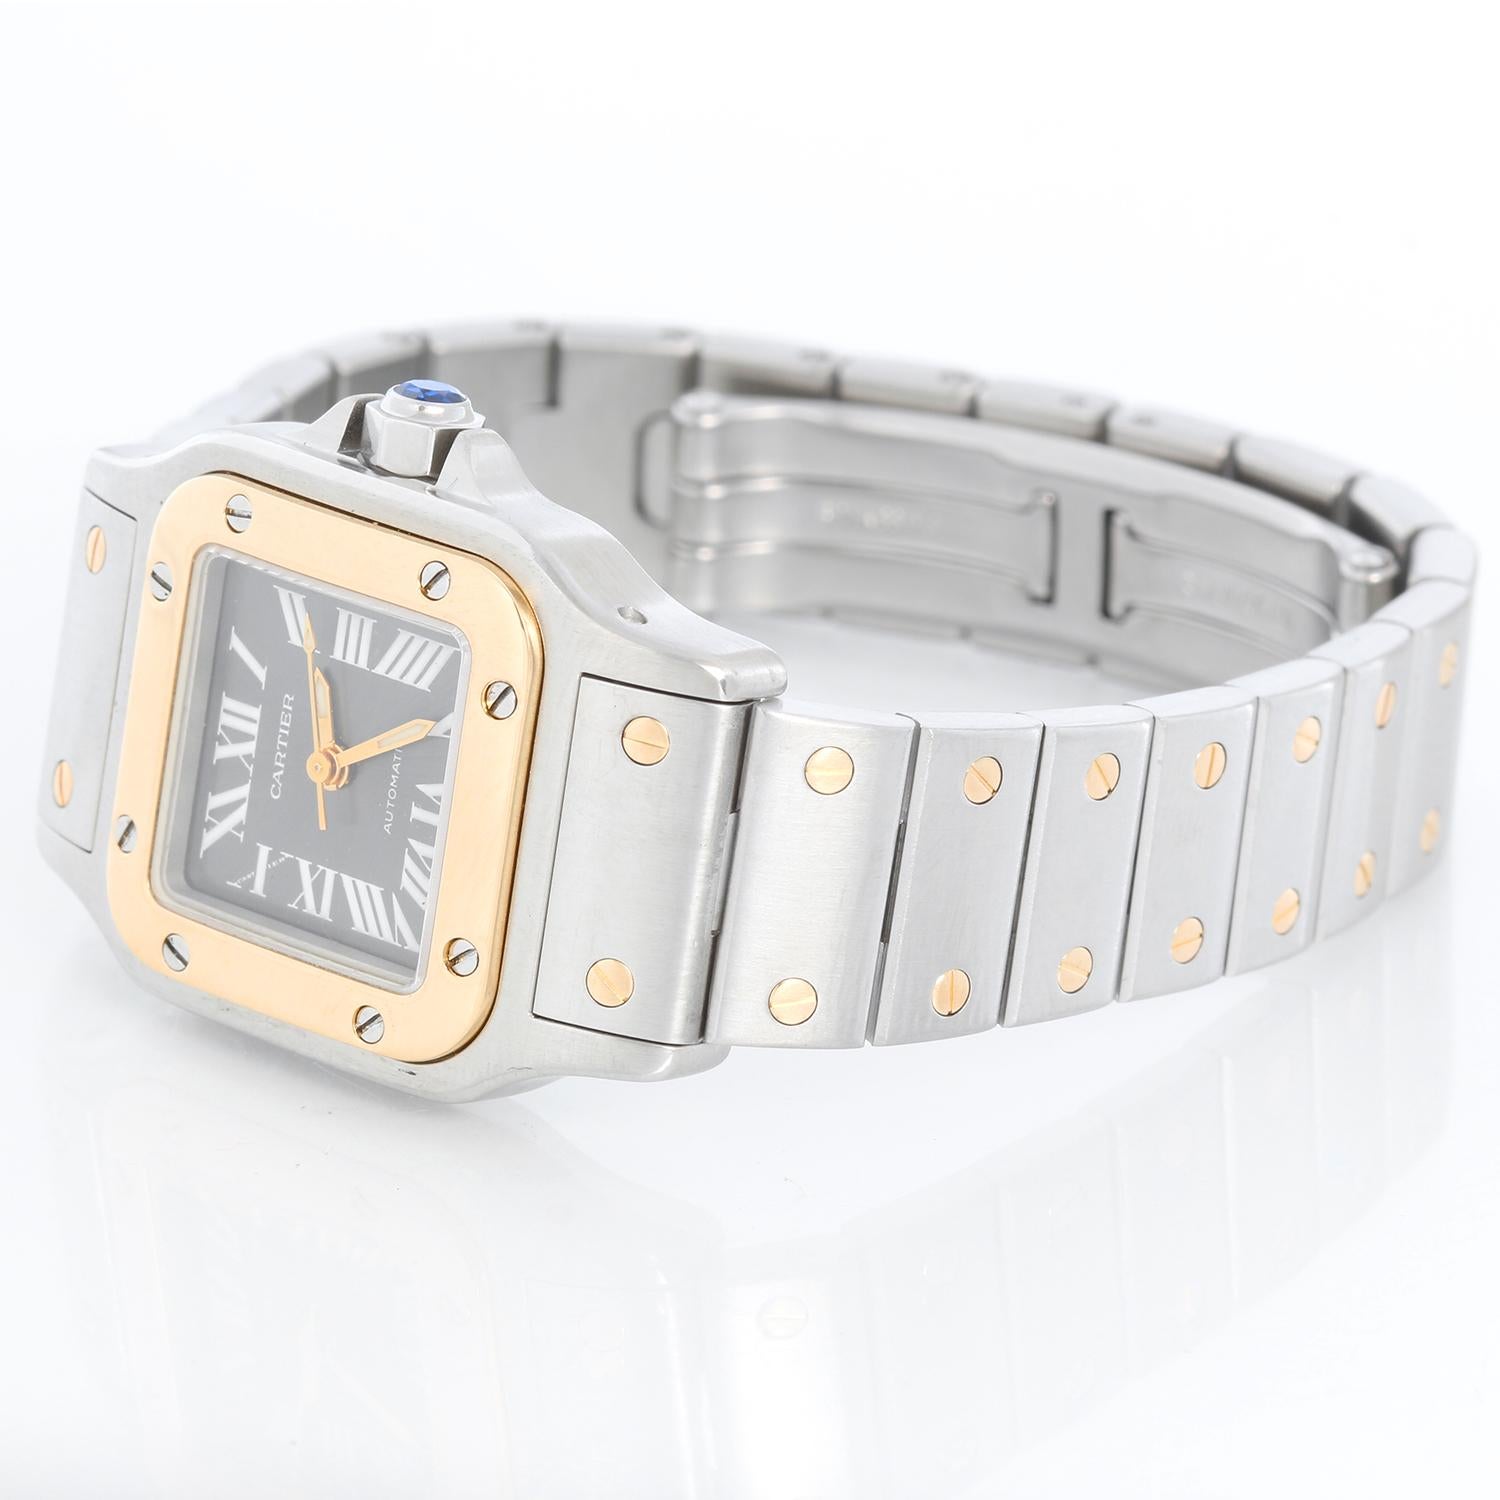 Cartier Santos Ladies 24mm Steel & Gold 2-Tone Automatic Watch 2423 - Automatic. Stainless steel case with 18k yellow gold bezel (24mm x 34mm ). Charcoal dial with luminous roman numerals. Stainless steel bracelet with gold accents. Pre-owned with